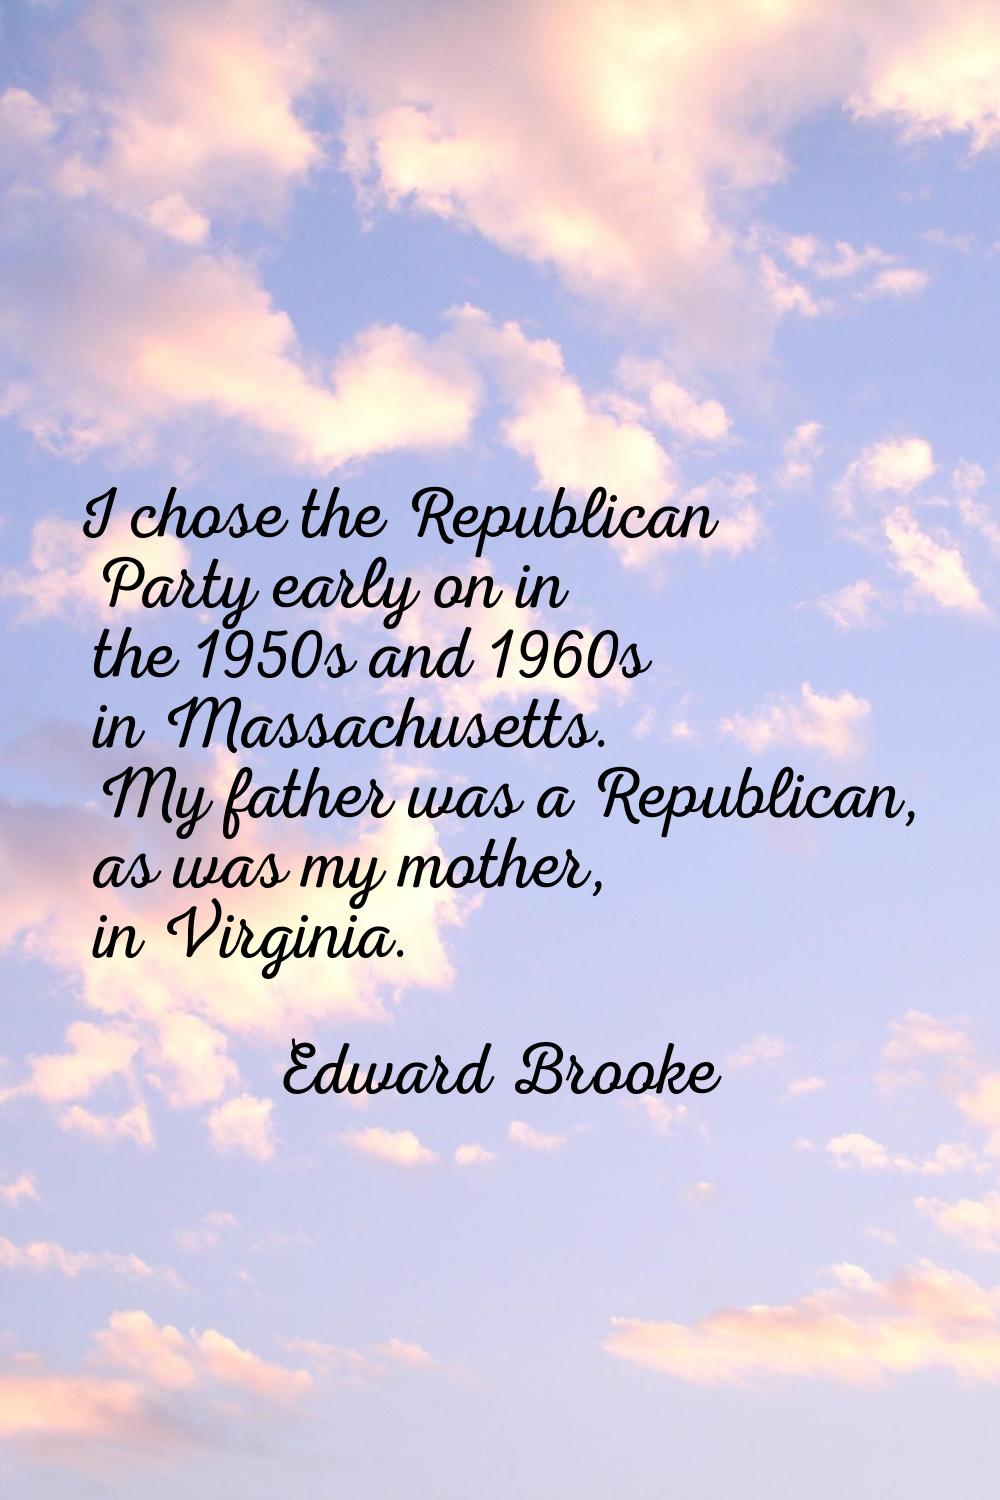 I chose the Republican Party early on in the 1950s and 1960s in Massachusetts. My father was a Repu